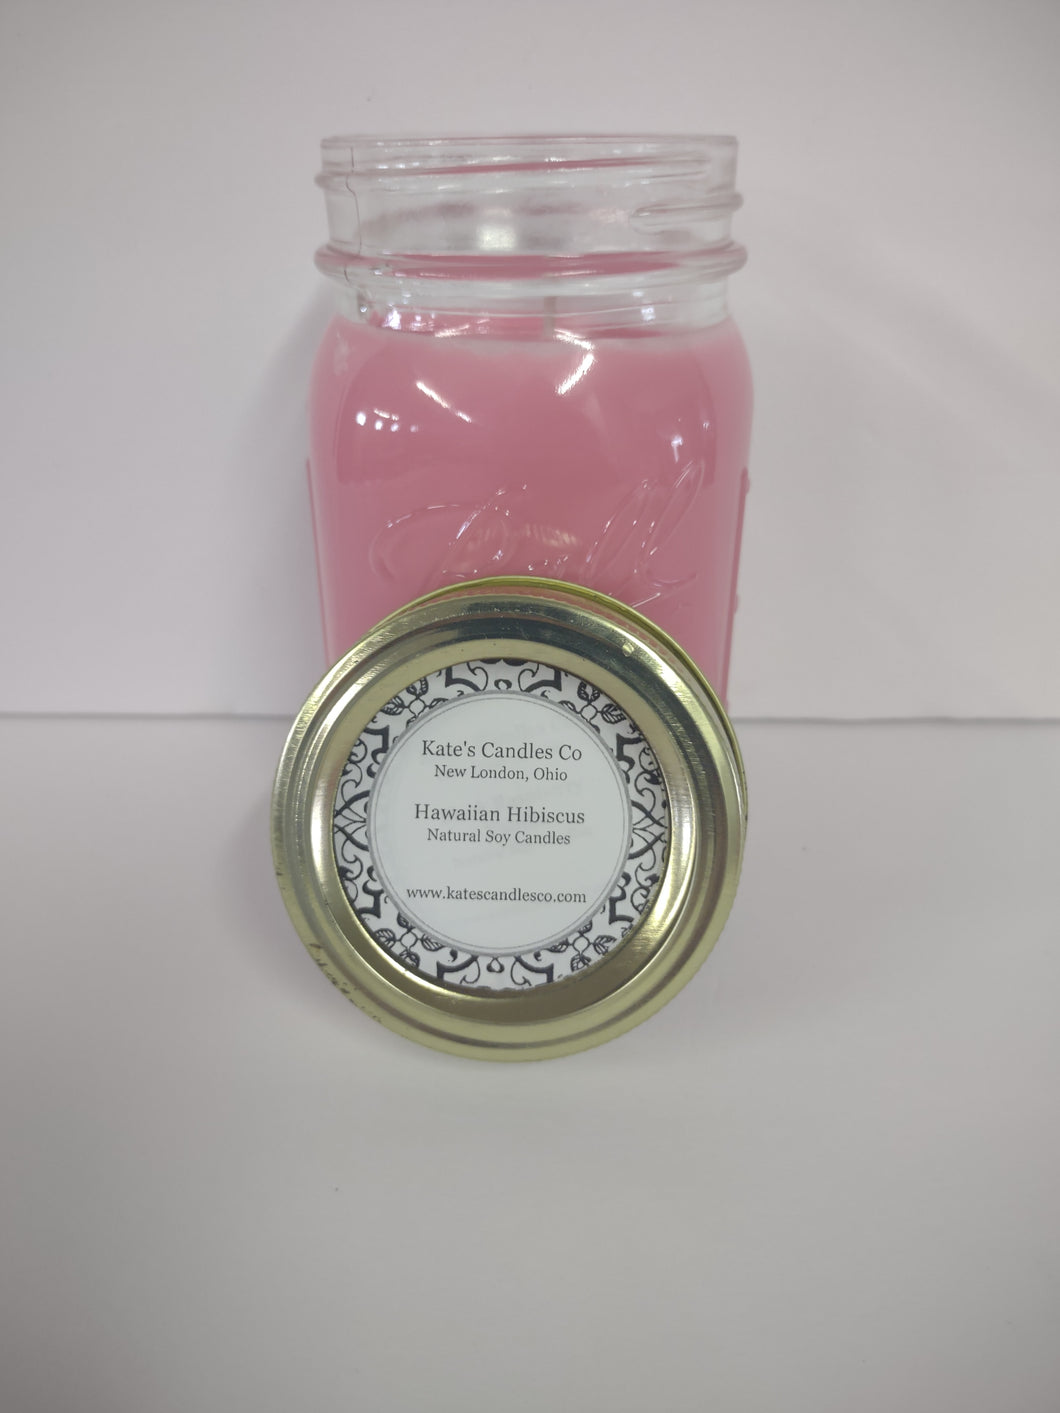 Hawaiian Hibiscus Candles - Kate's Candles Co.